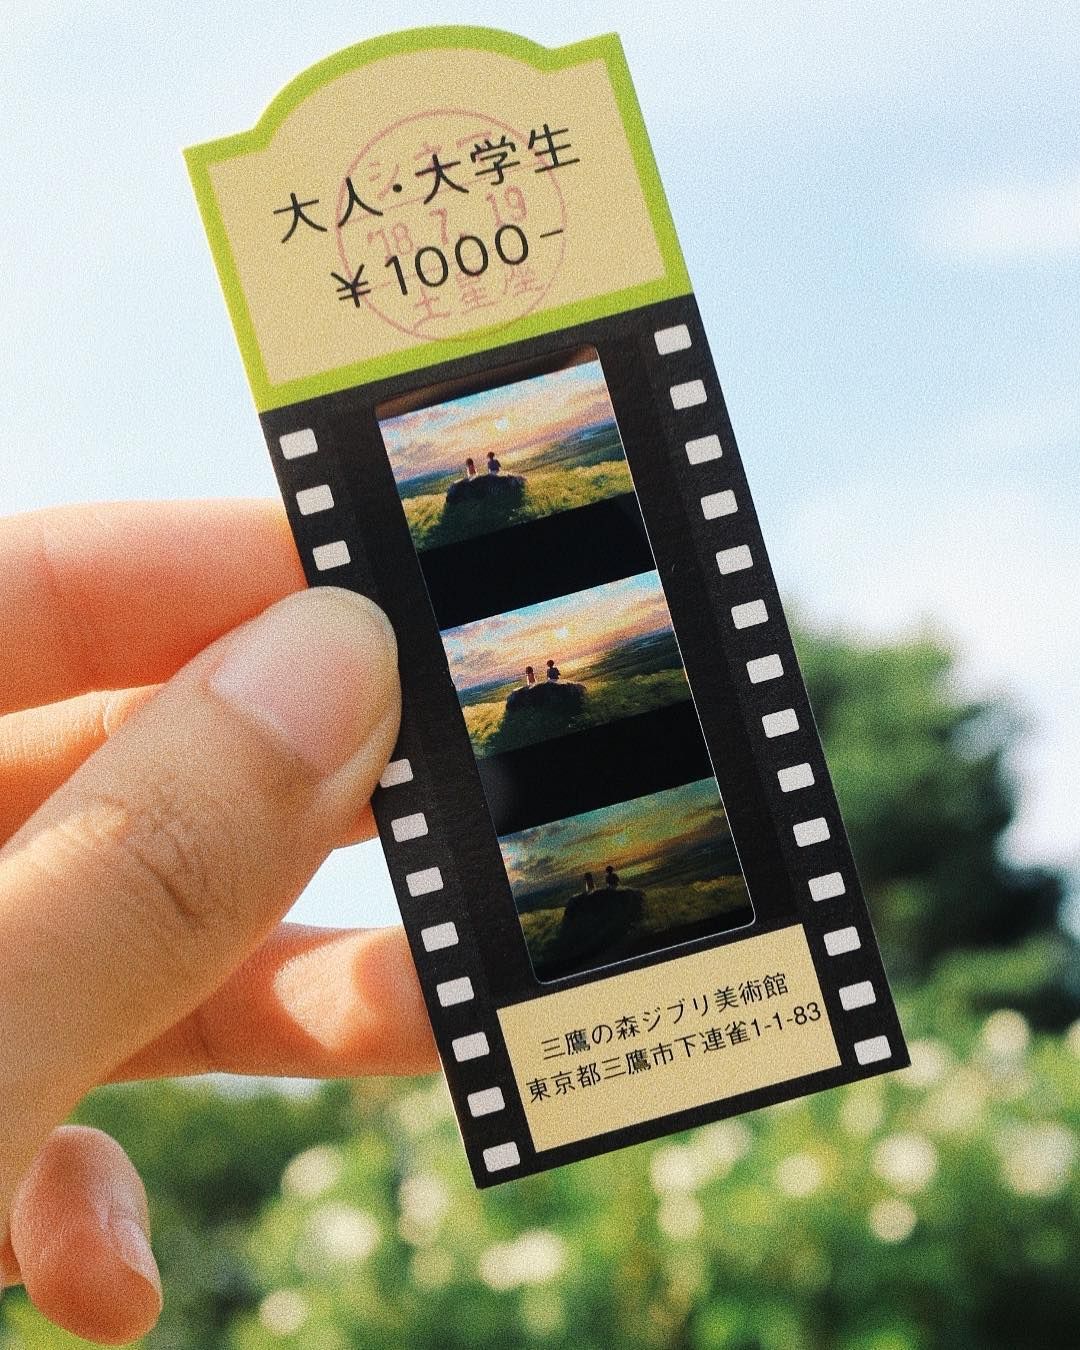 A comprehensive guide on how to purchase Studio Ghibli Museum tickets ...